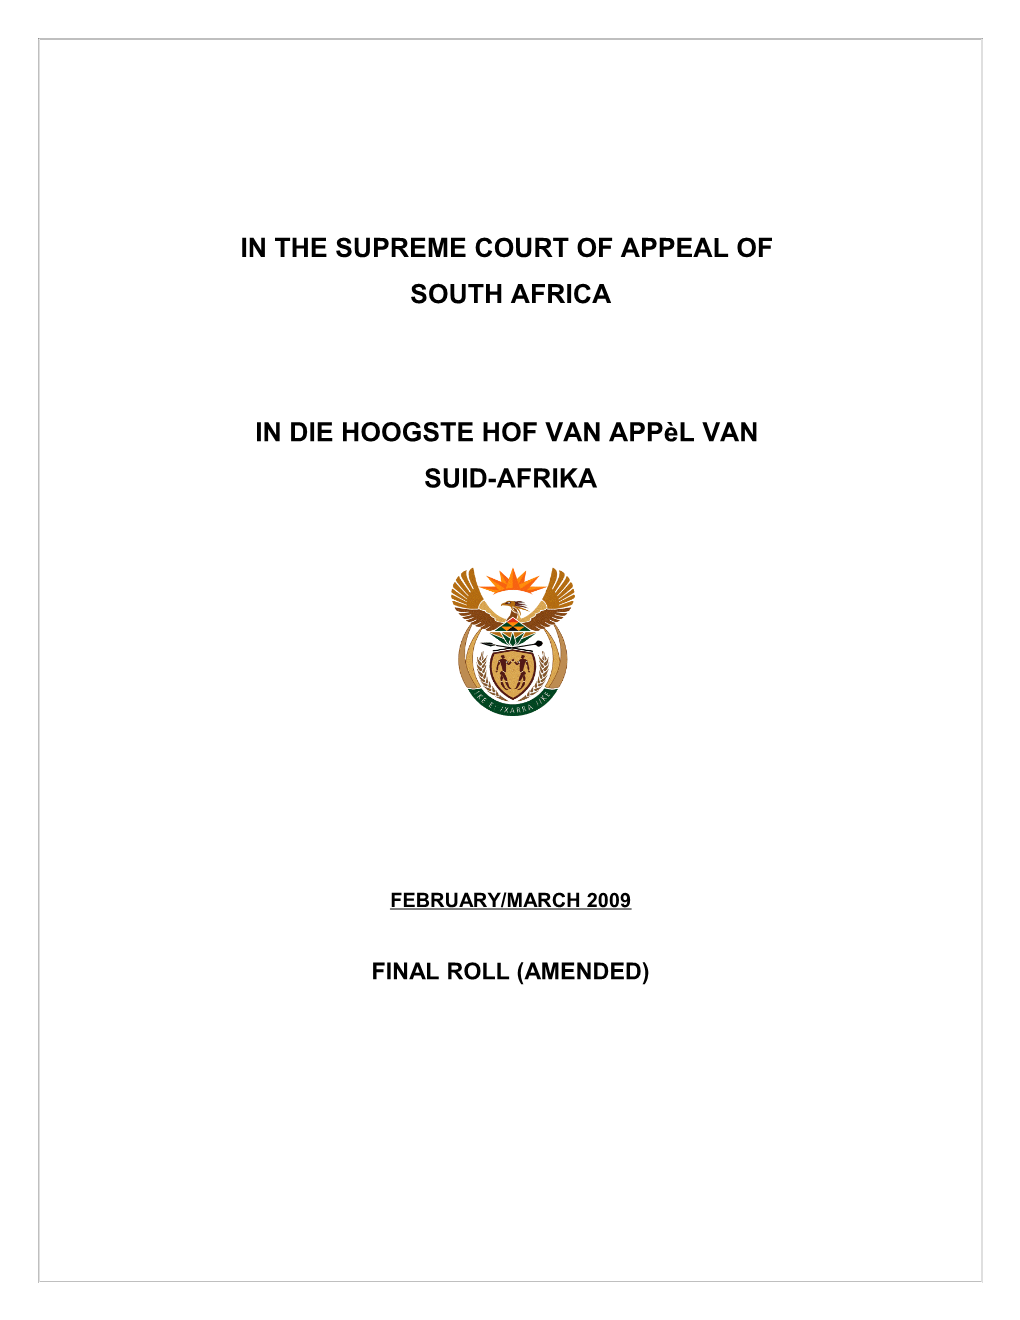 In the Supreme Court of Appeal Of